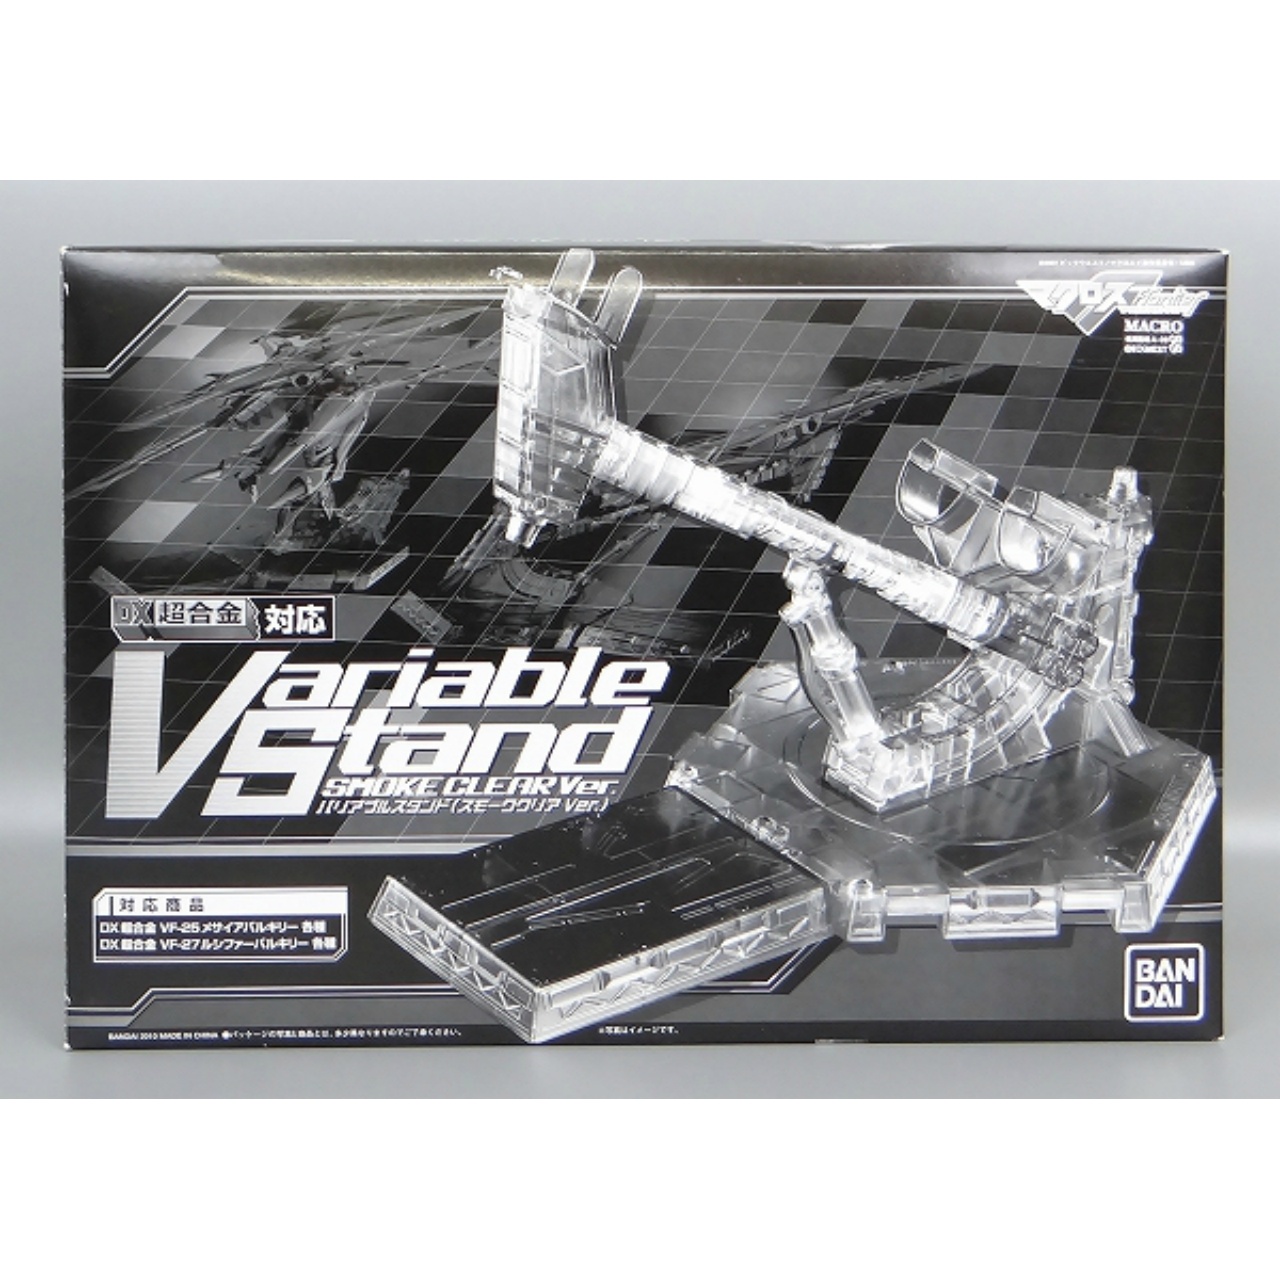 DX Chogokin Variable Stand (Smoke Clear Version)